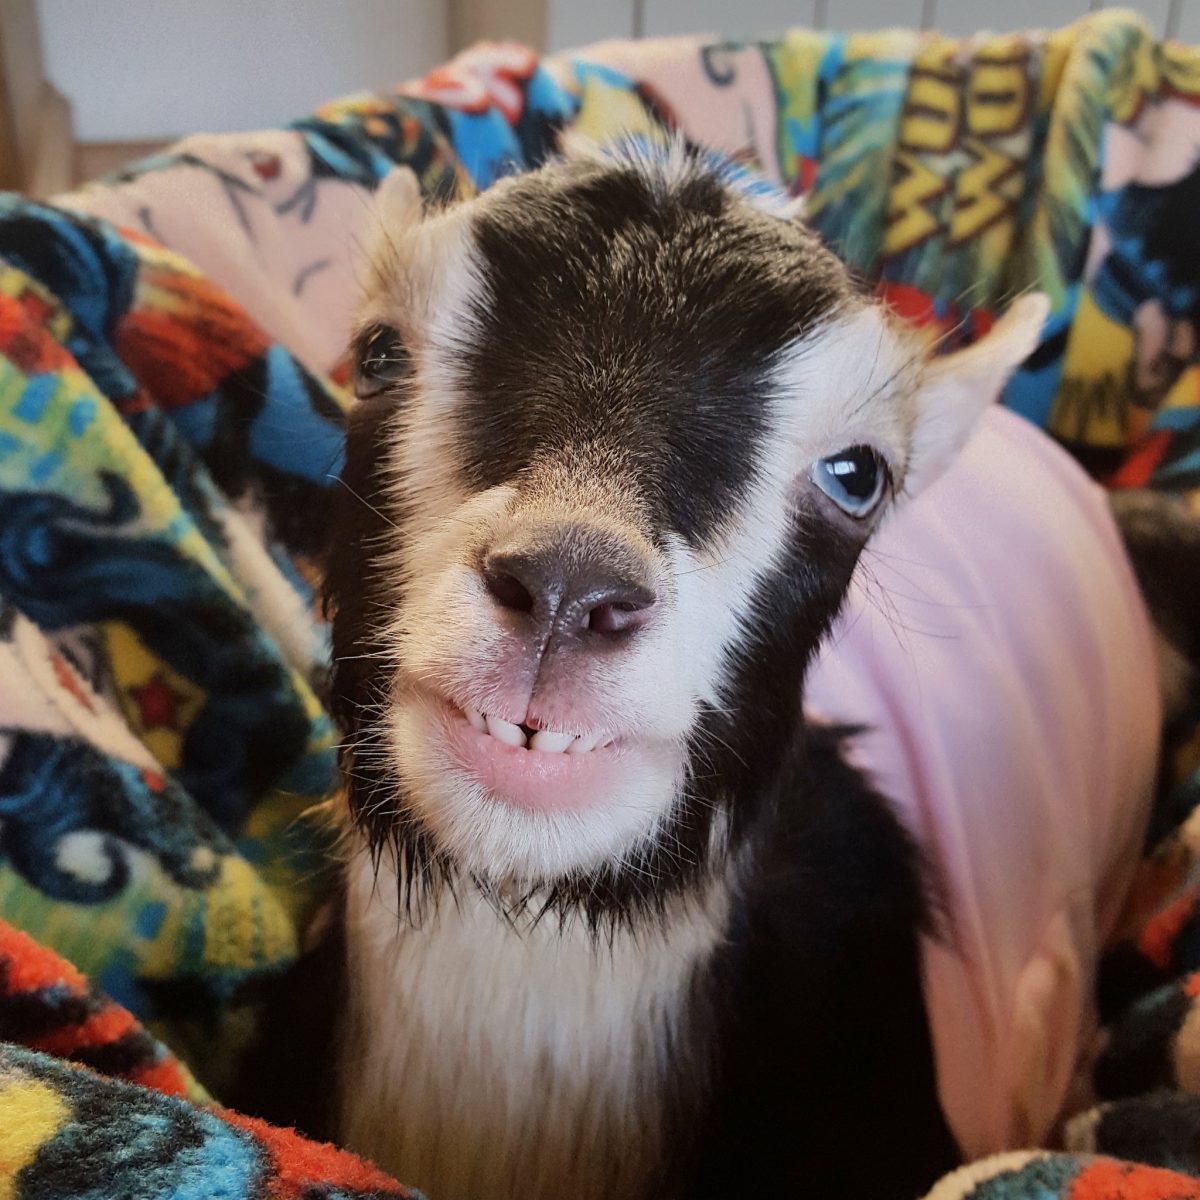 Polly Smiling for the Camera - Source: Twitter/Goats of Anarchy